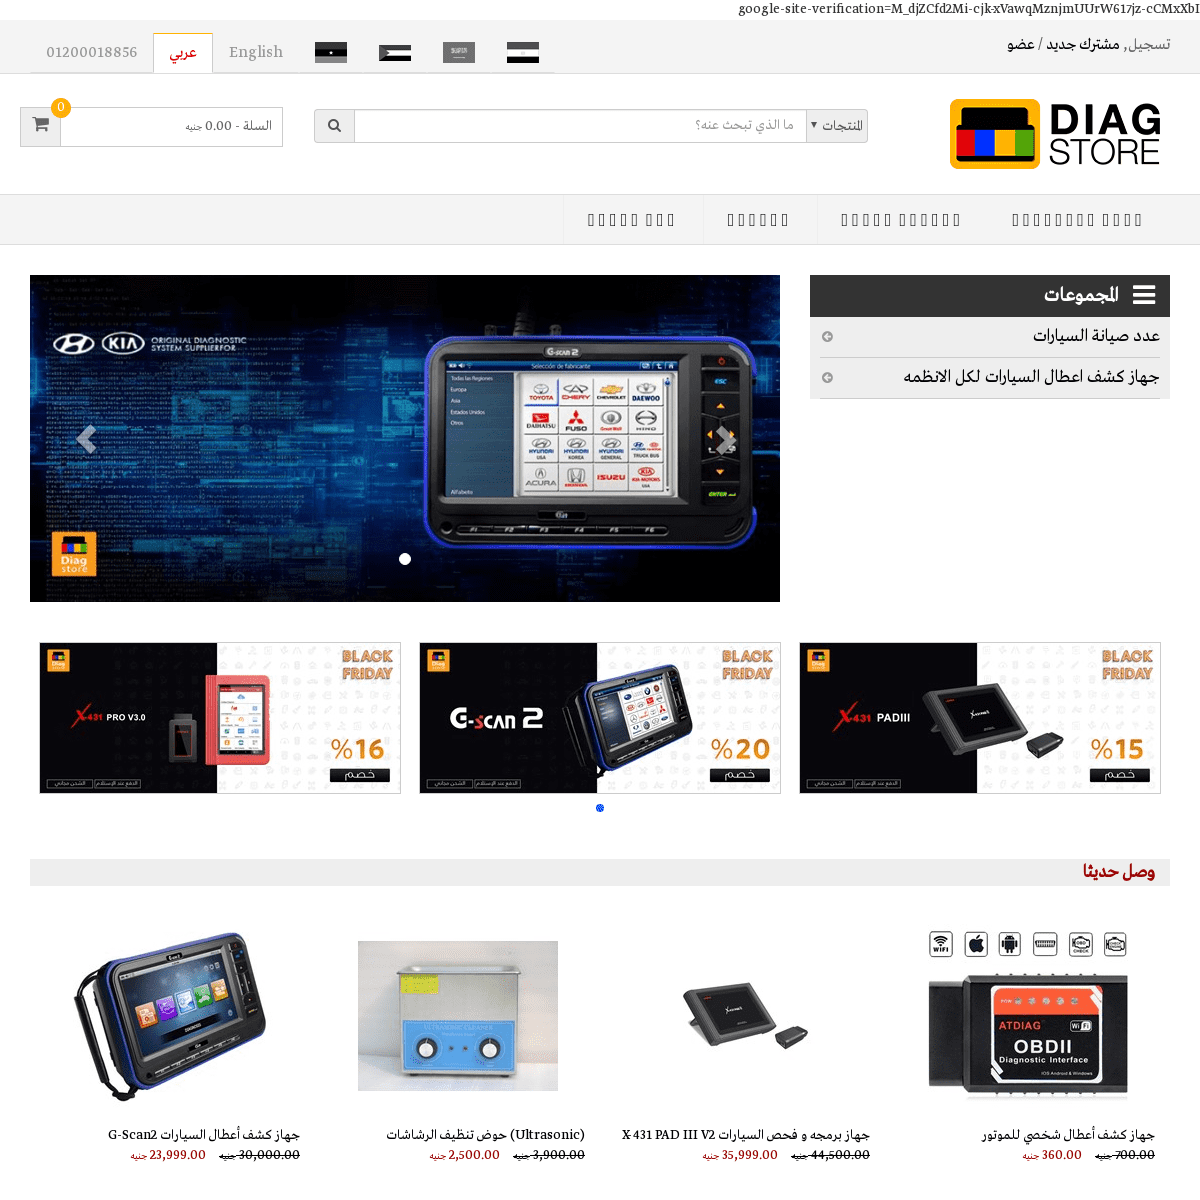 A complete backup of diag-store.com